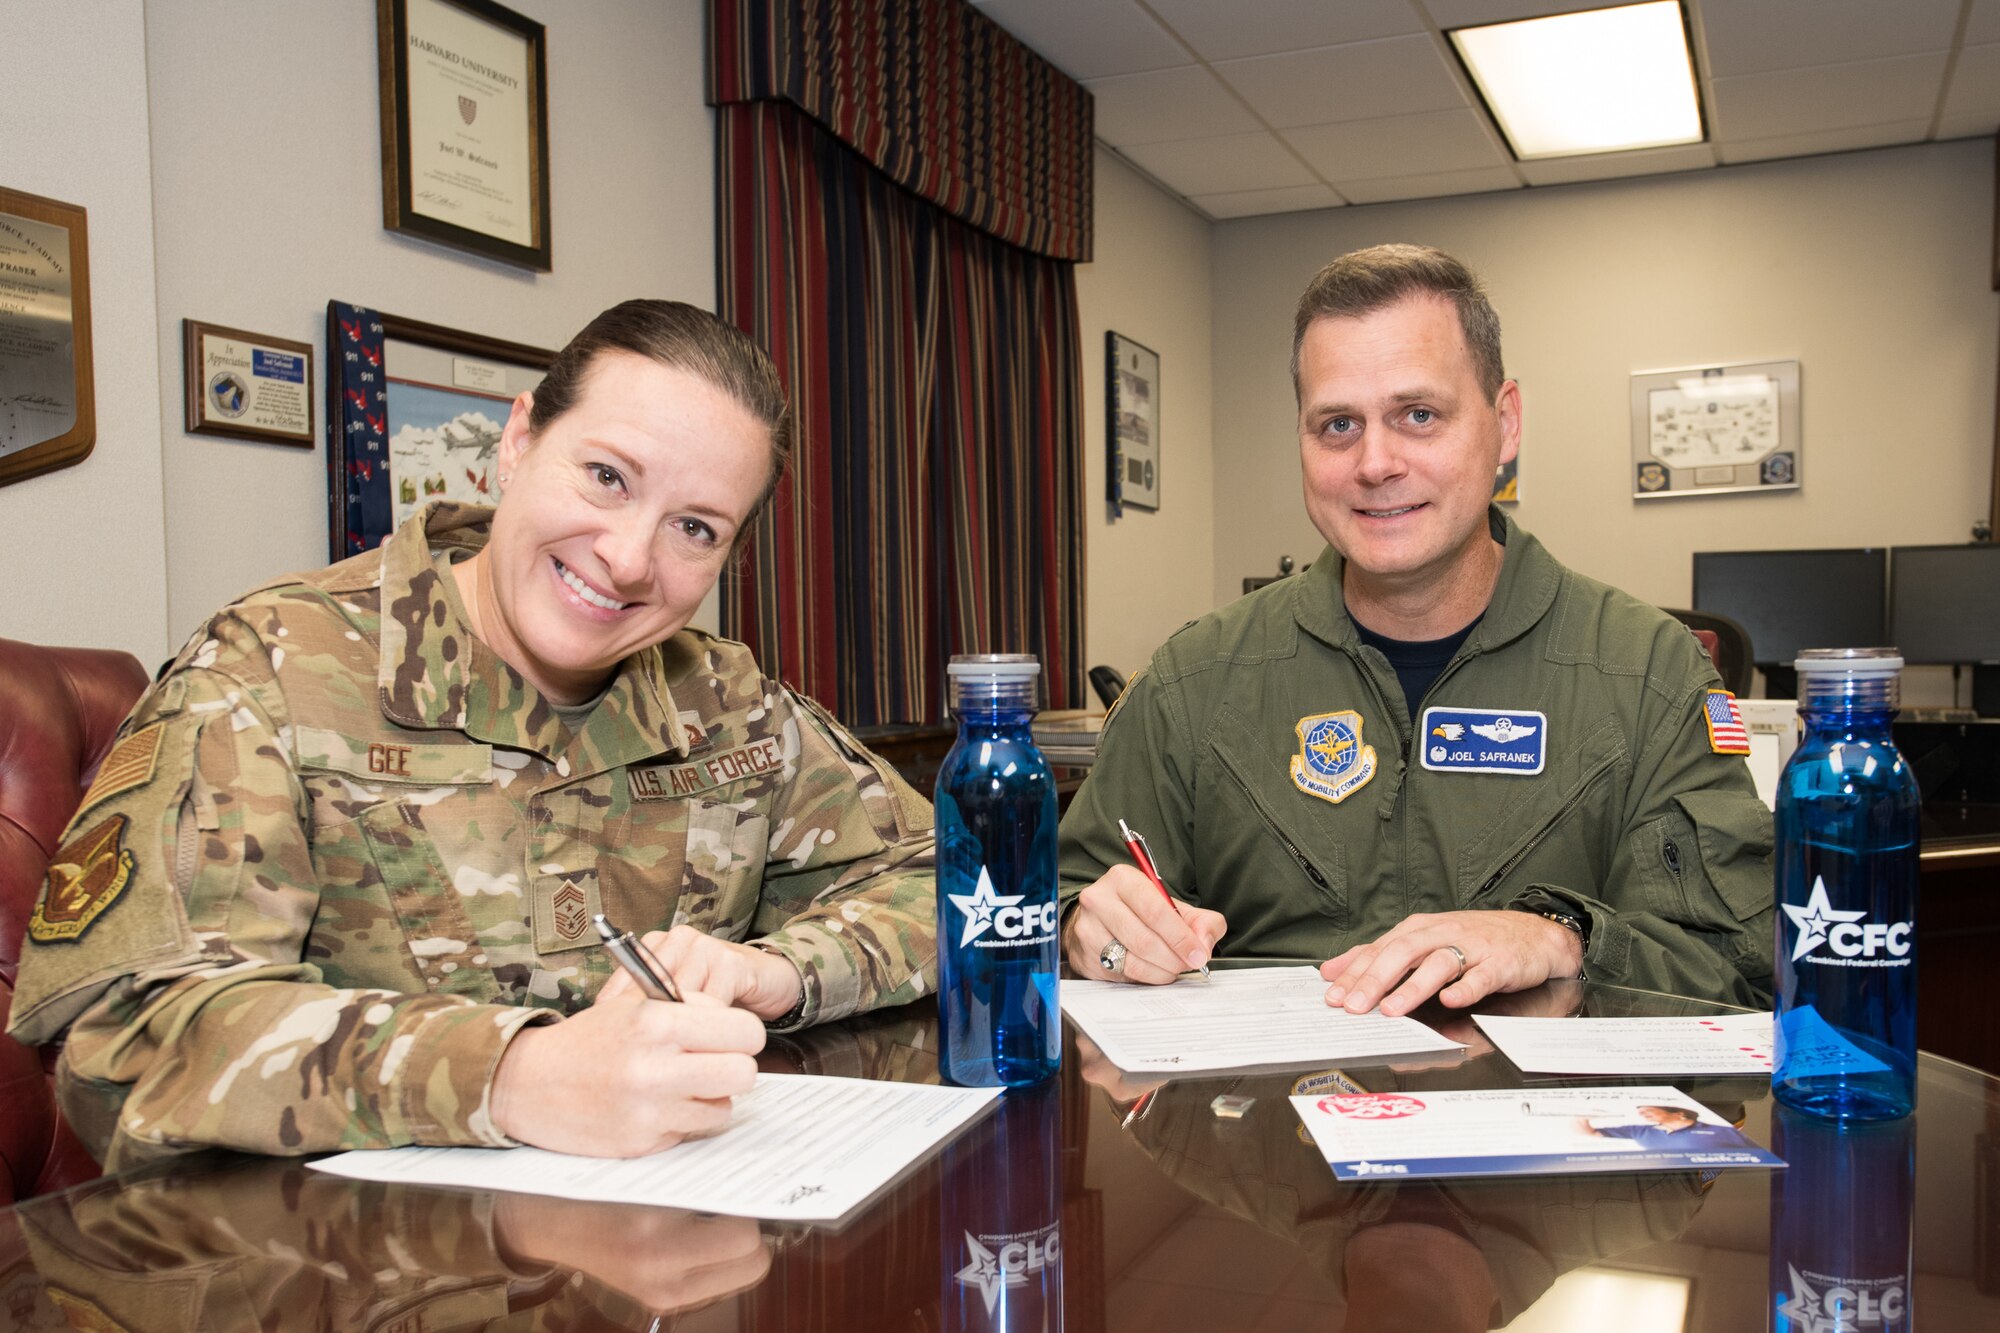 Col. Joel Safranek, right, 436th Airlift Wing commander, and Chief Master Sgt. Shae Gee, 436 AW command chief,  sign their 2019 Combined Federal Campaign pledge forms Oct. 11, 2019, at Dover Air Force Base, Del. The campaign runs from Oct. 7 through Nov. 18, 2019. Interested donors can see their unit representative or visit www.cfcgiving.opm.gov. (U.S. Air Force photo by Mauricio Campino)